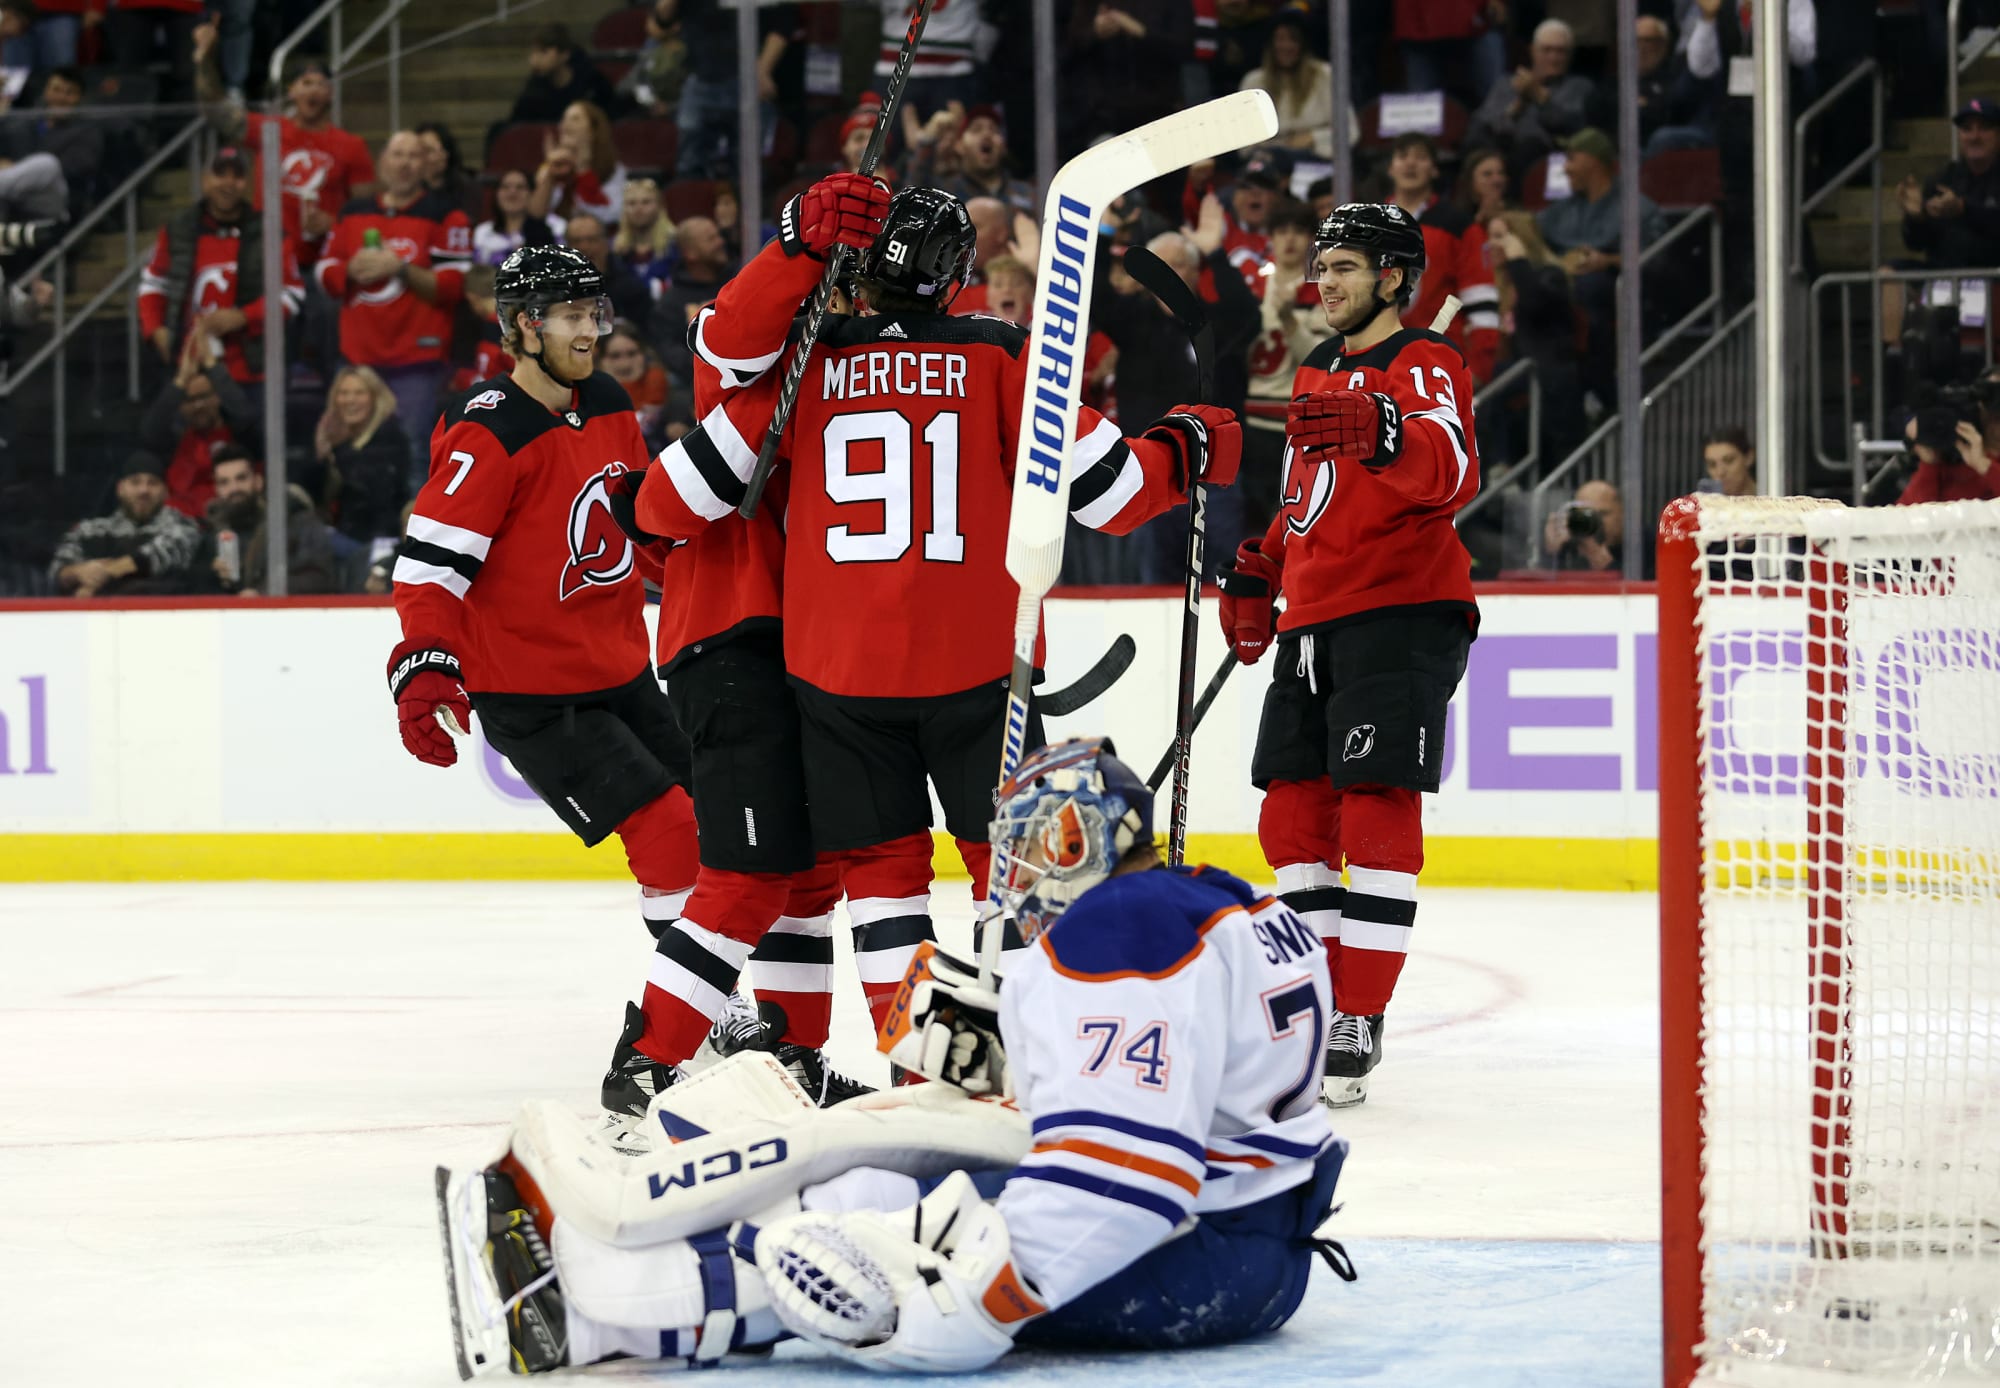 Successful start impresses N.J. Devils fans – The Wessex Wire